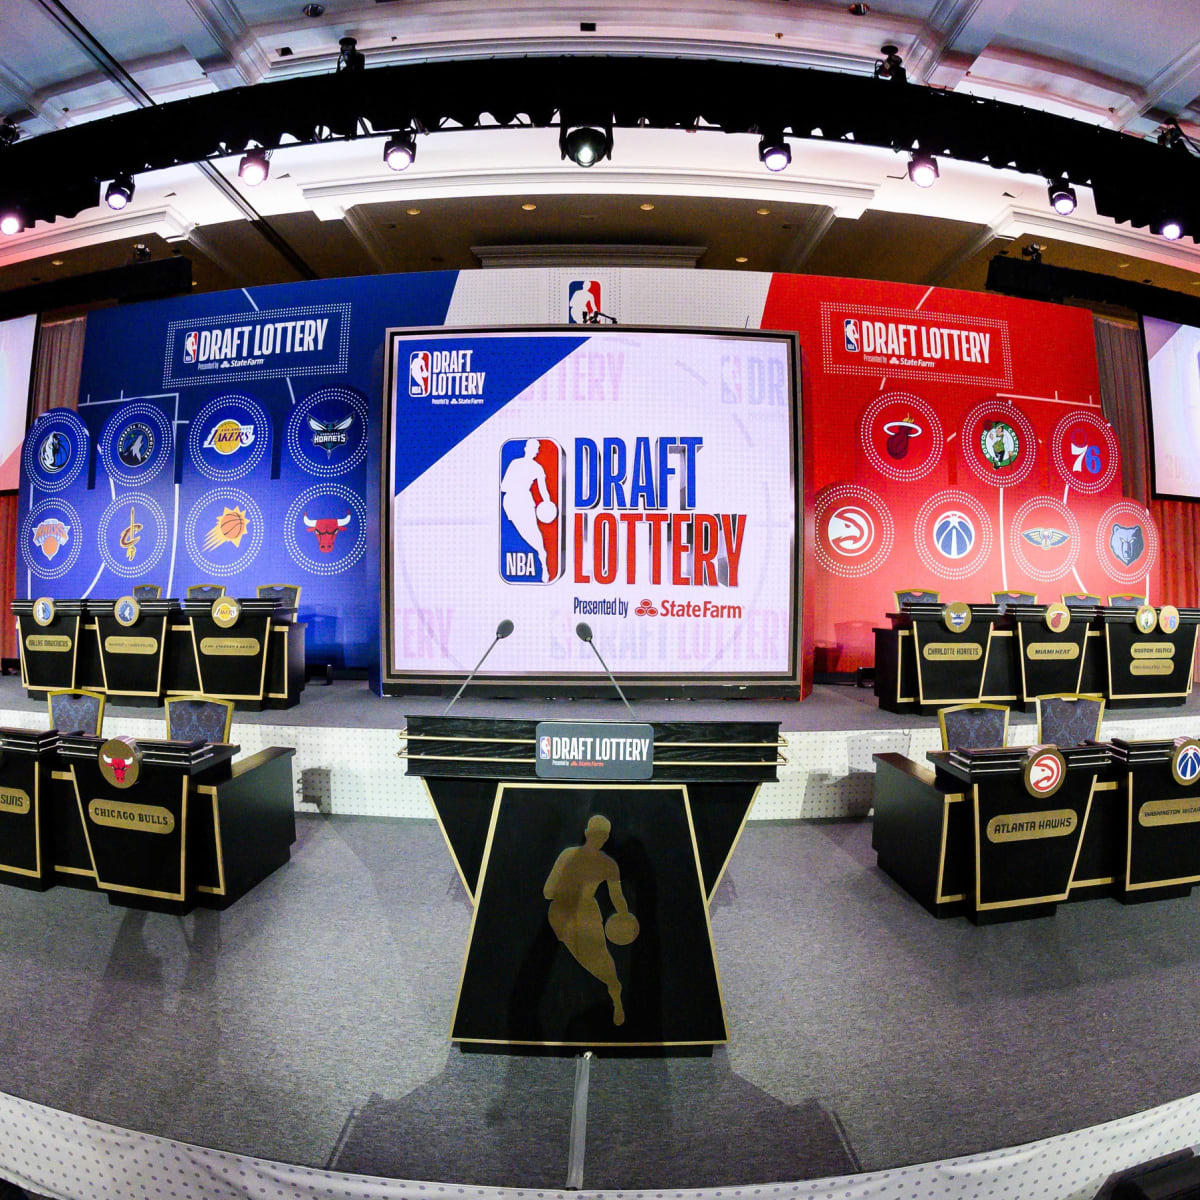 How to Watch 2022 NBA Draft Lottery Date, Time, Odds, Draft Order and Top Prospects